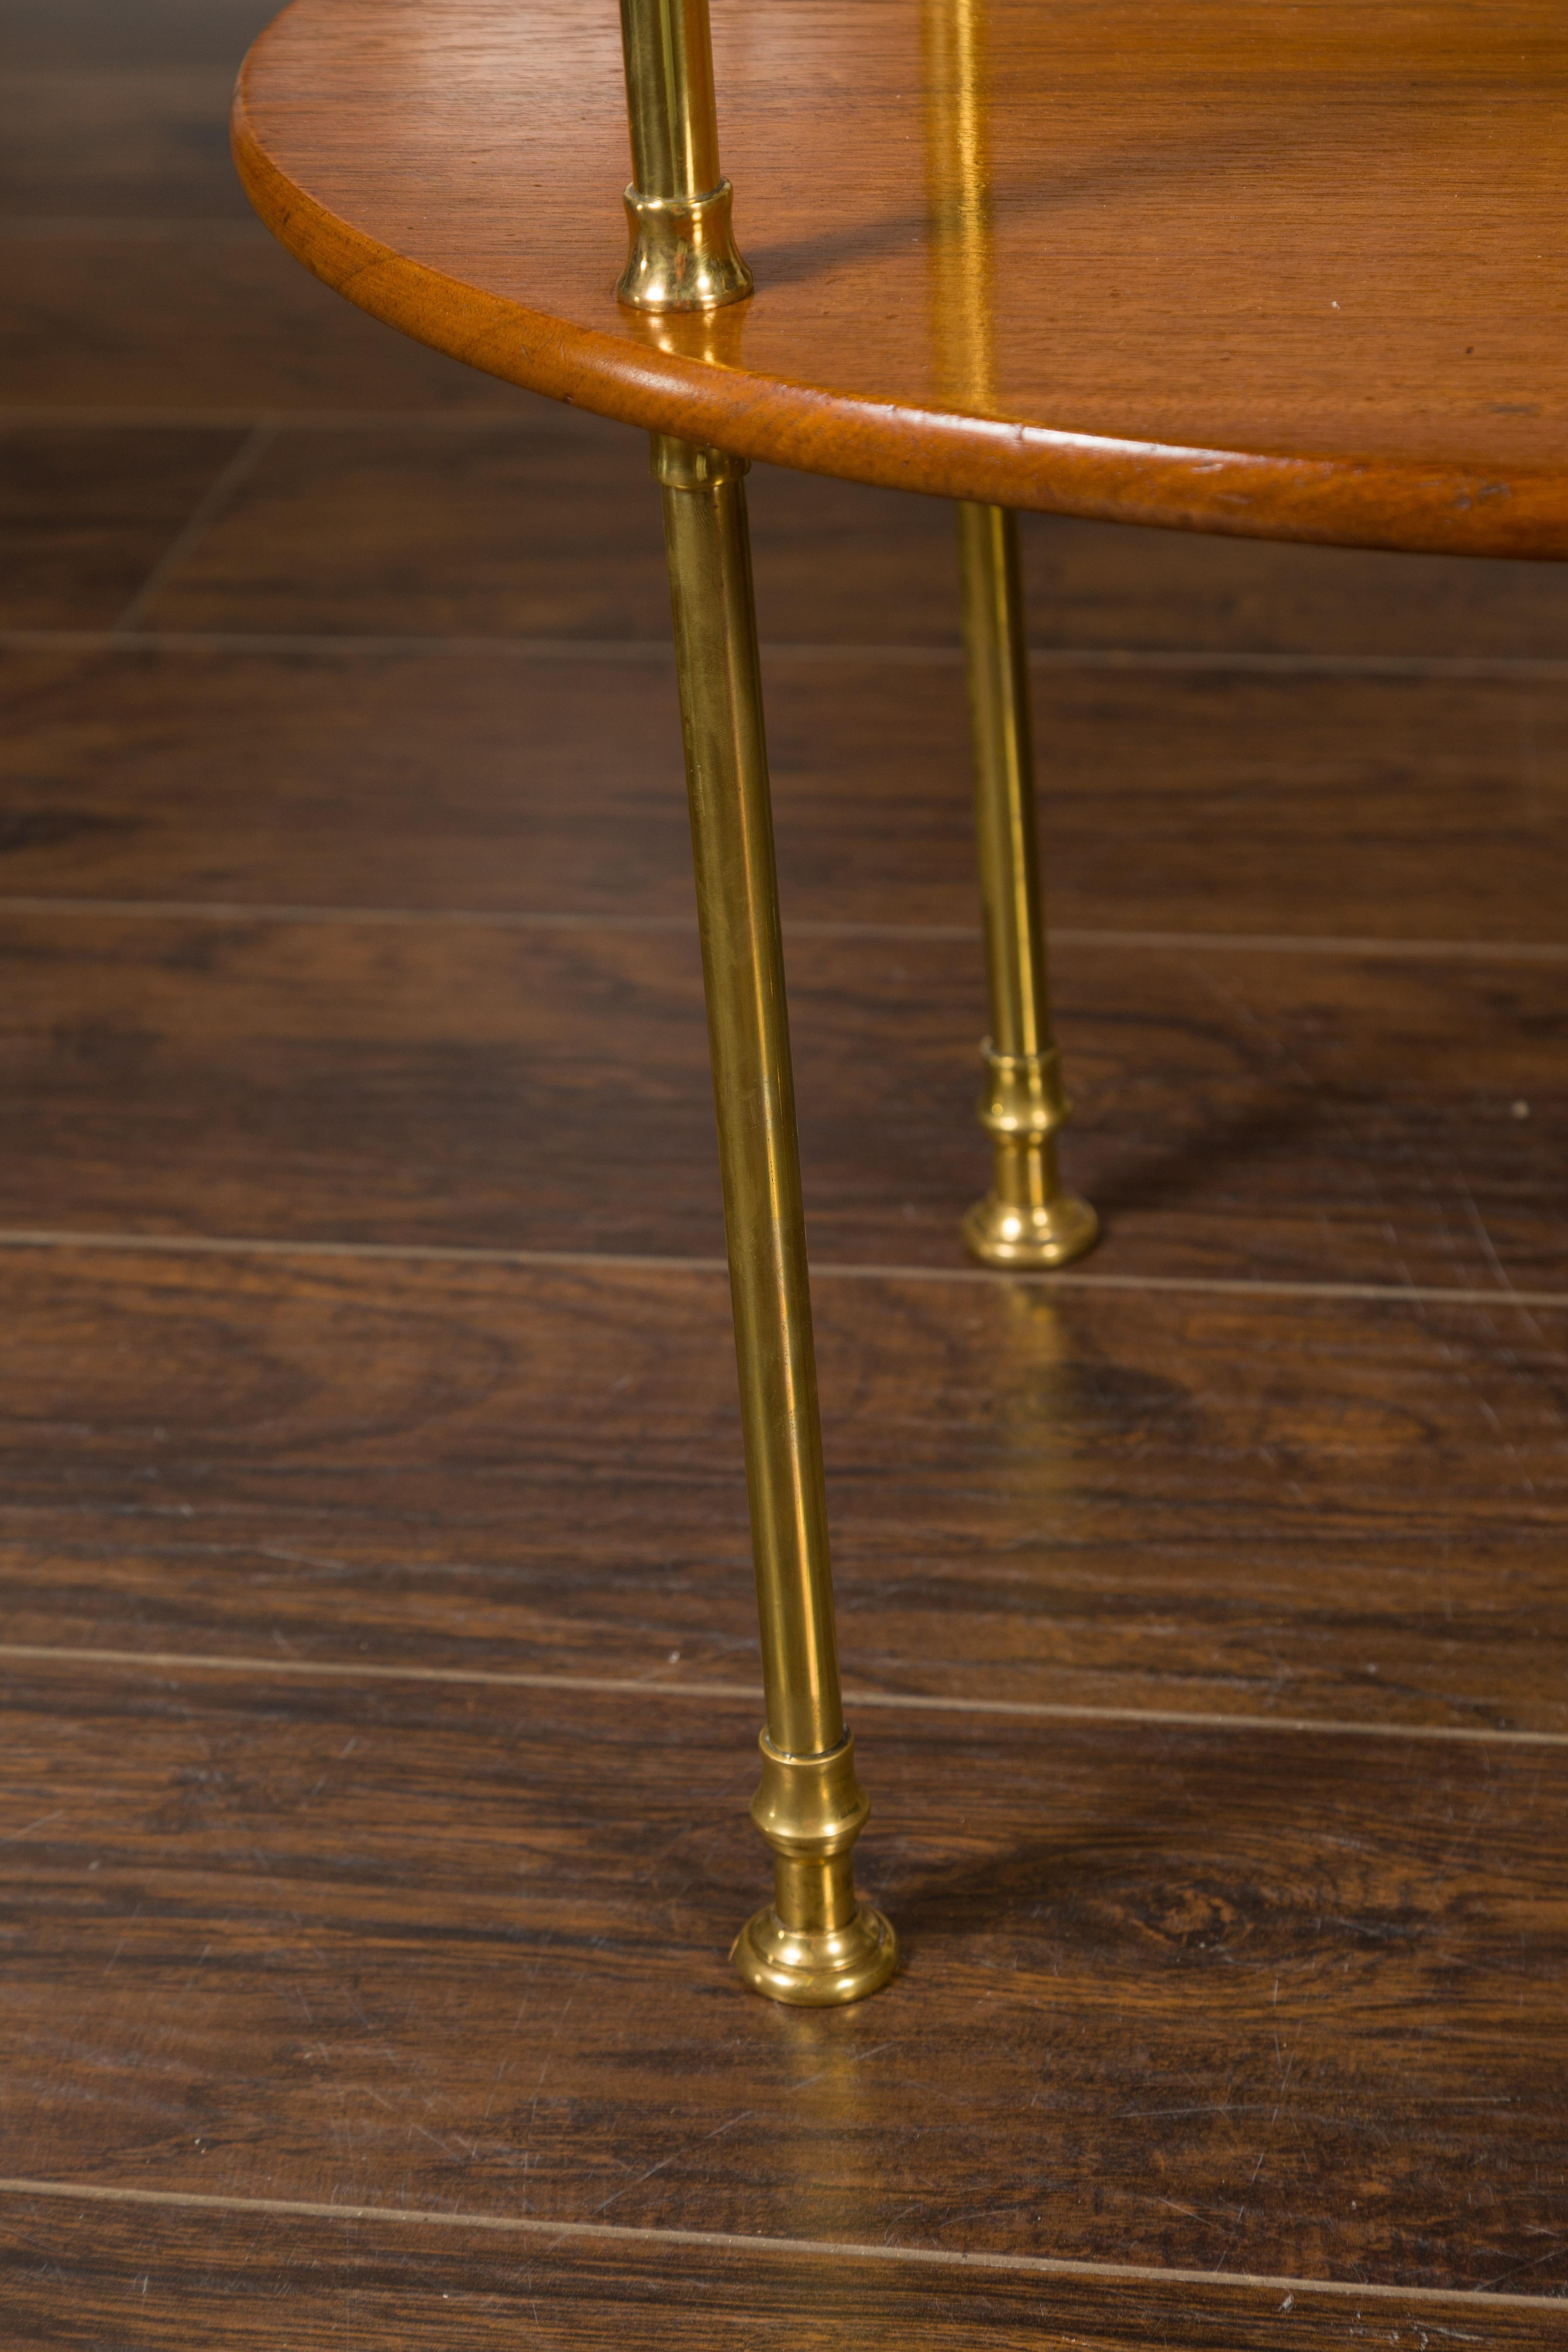 English Midcentury Mahogany Oval Two-Tiered Table with Brass Accents For Sale 3